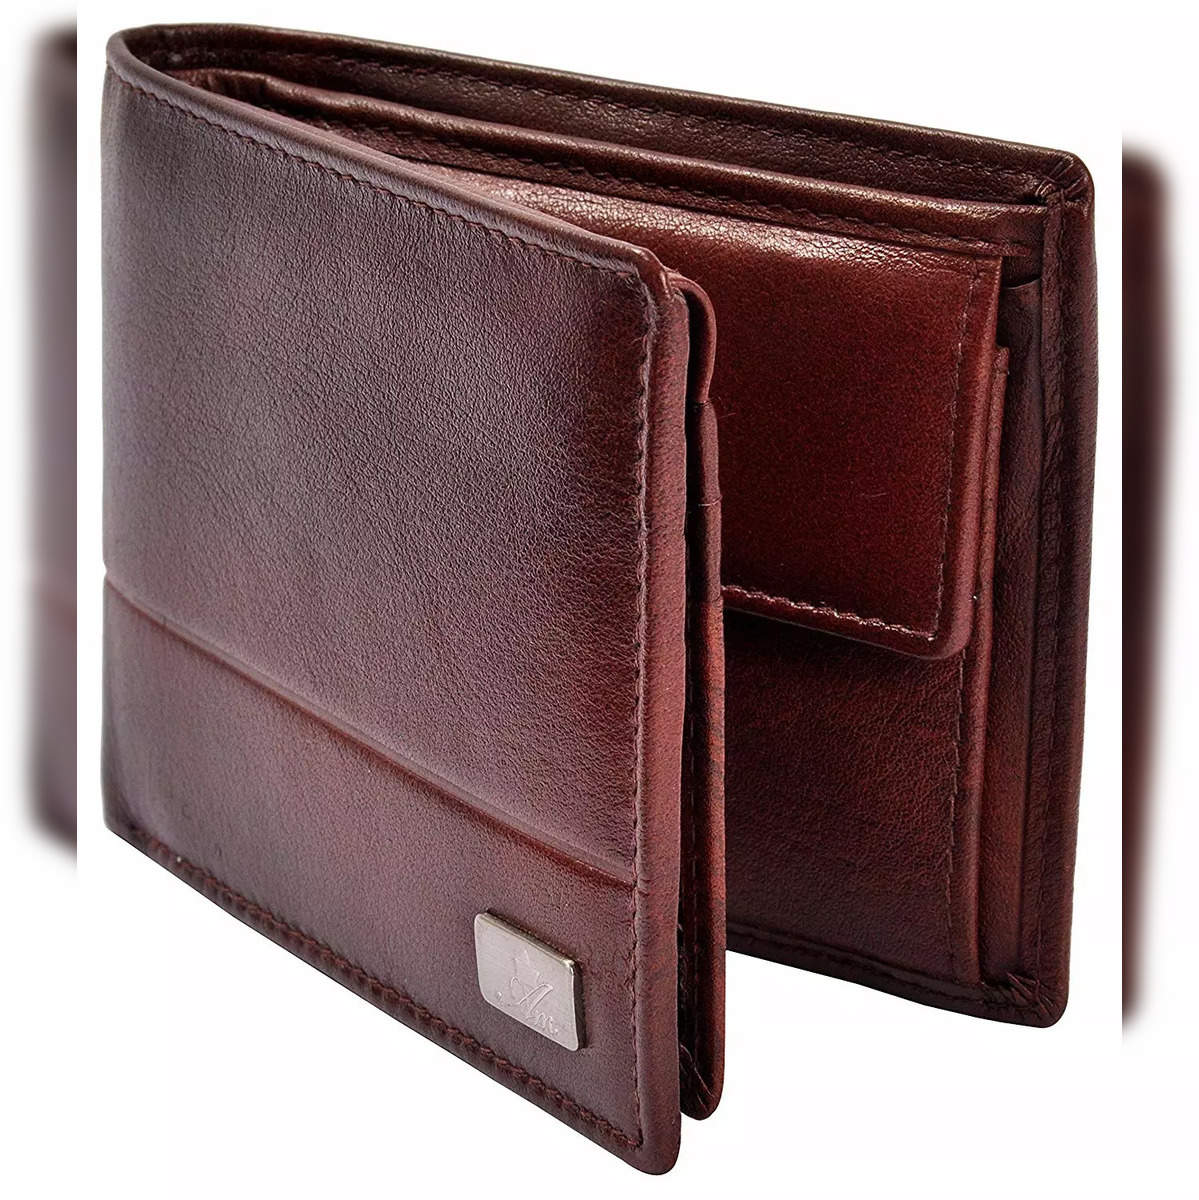 Top 9 Stylish Luxury Wallets for Men and Women in Trend  Leather wallet  design, Wallet fashion, Genuine leather wallets